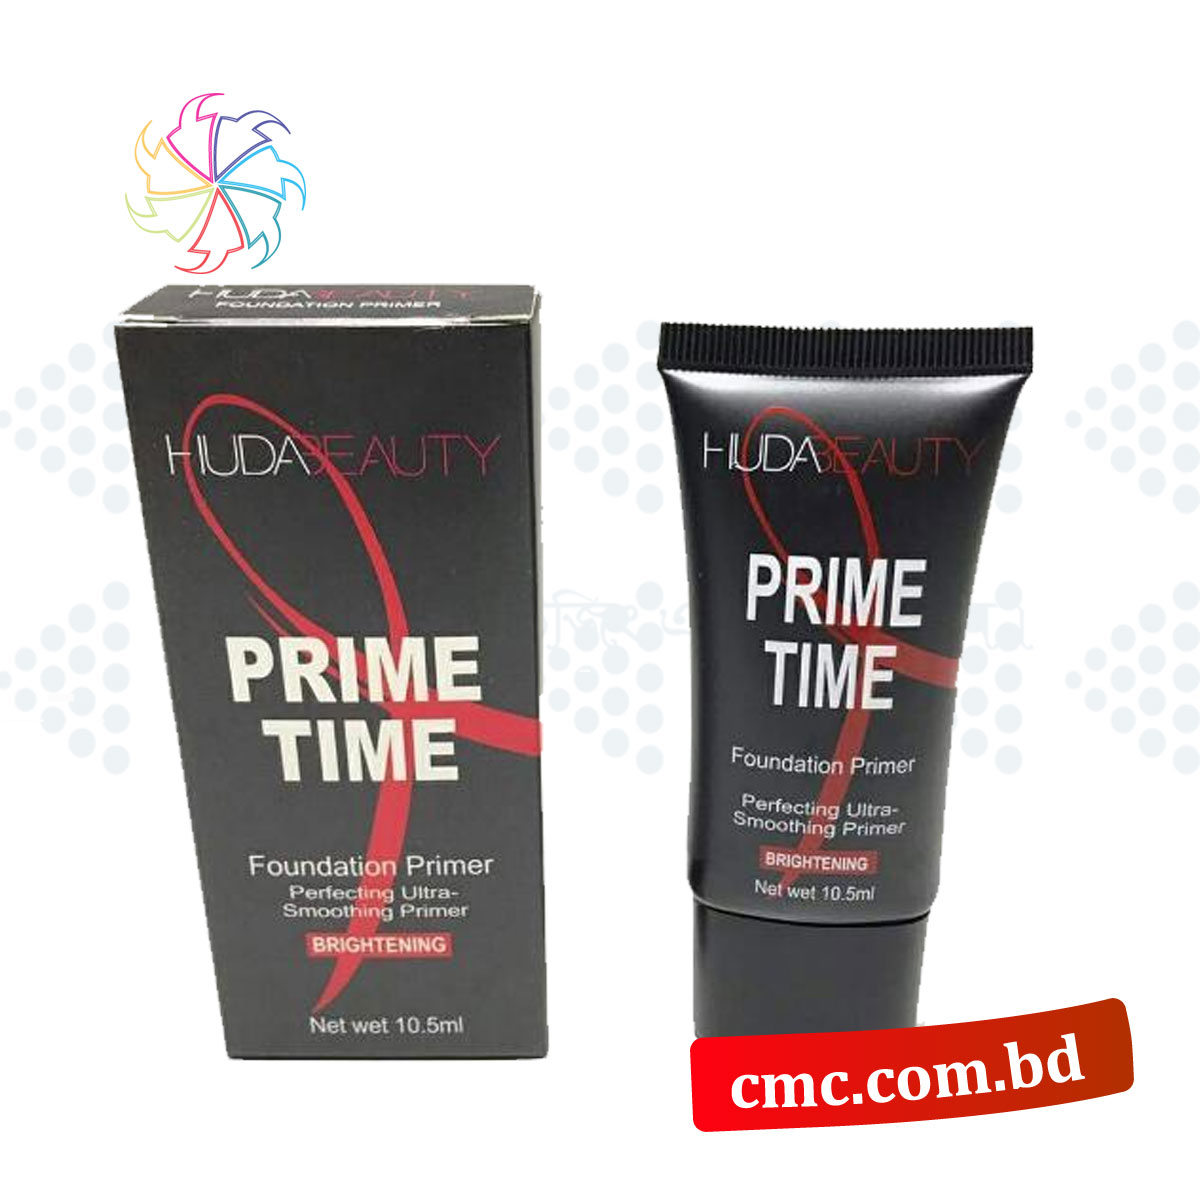 PRIME TIME, HUDABEAUTY FOUNDATION PRIMER PERFECTING ULTRA-SMOOTING PRIMER